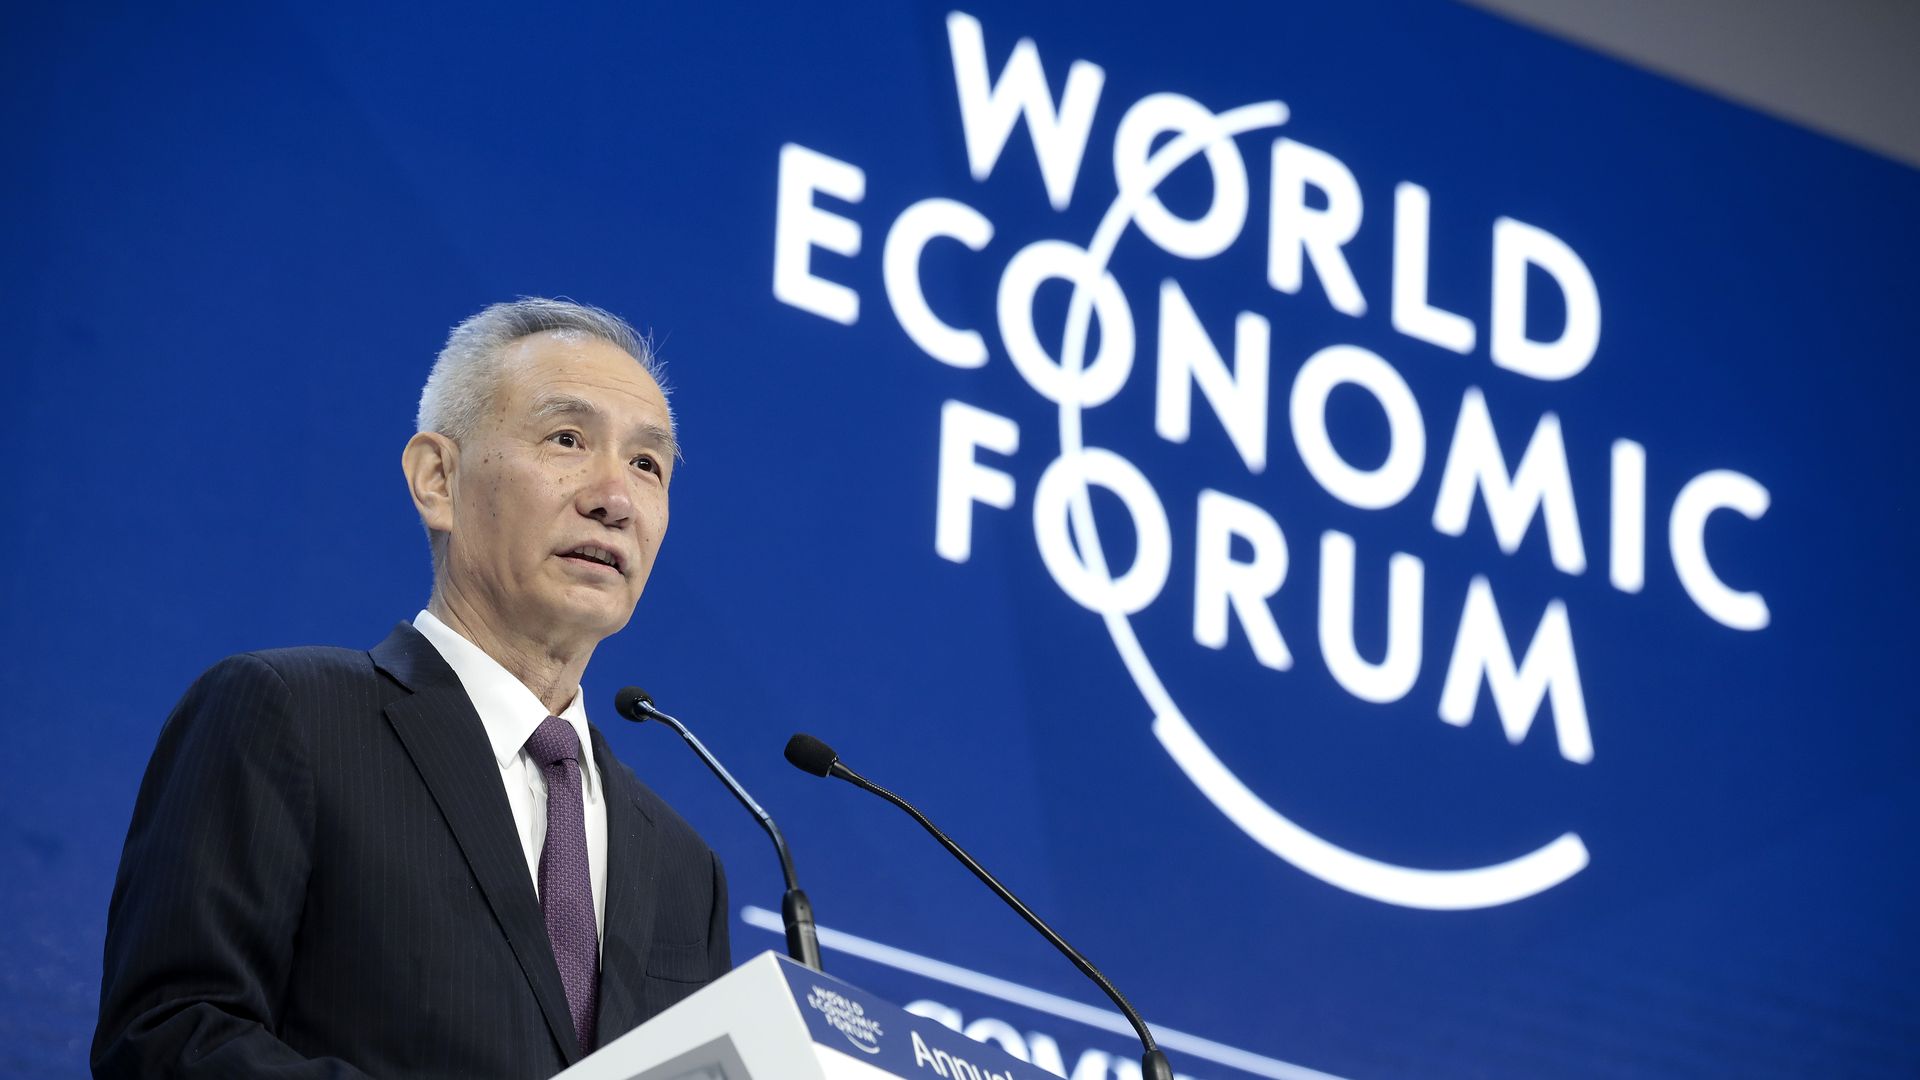 Liu He, director of the central leading group of the Communist Party of China, speaks during a special session on day two of the World Economic Forum